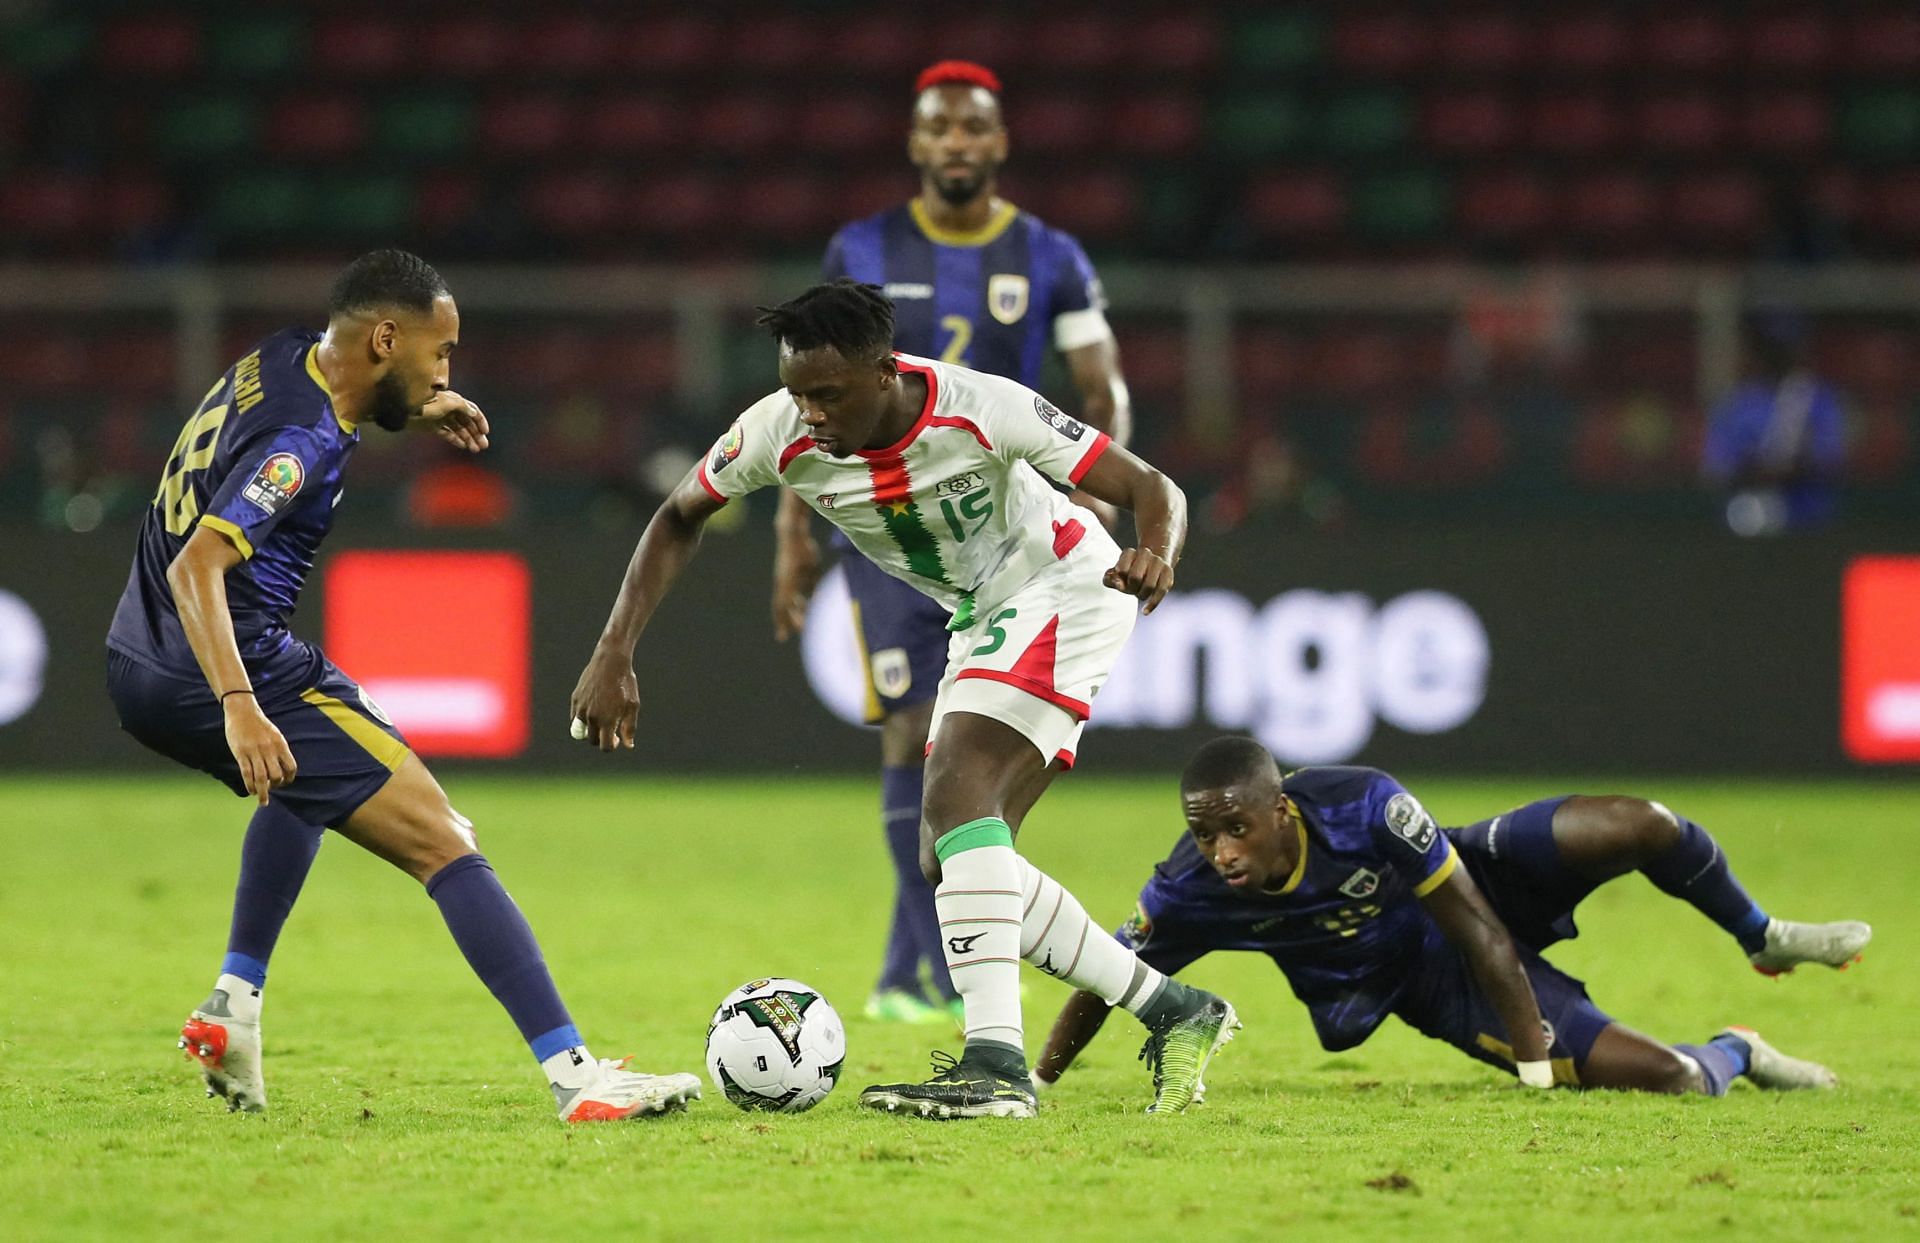 Burkina Faso face Cape Verde in their AFCON qualification campaign on Friday